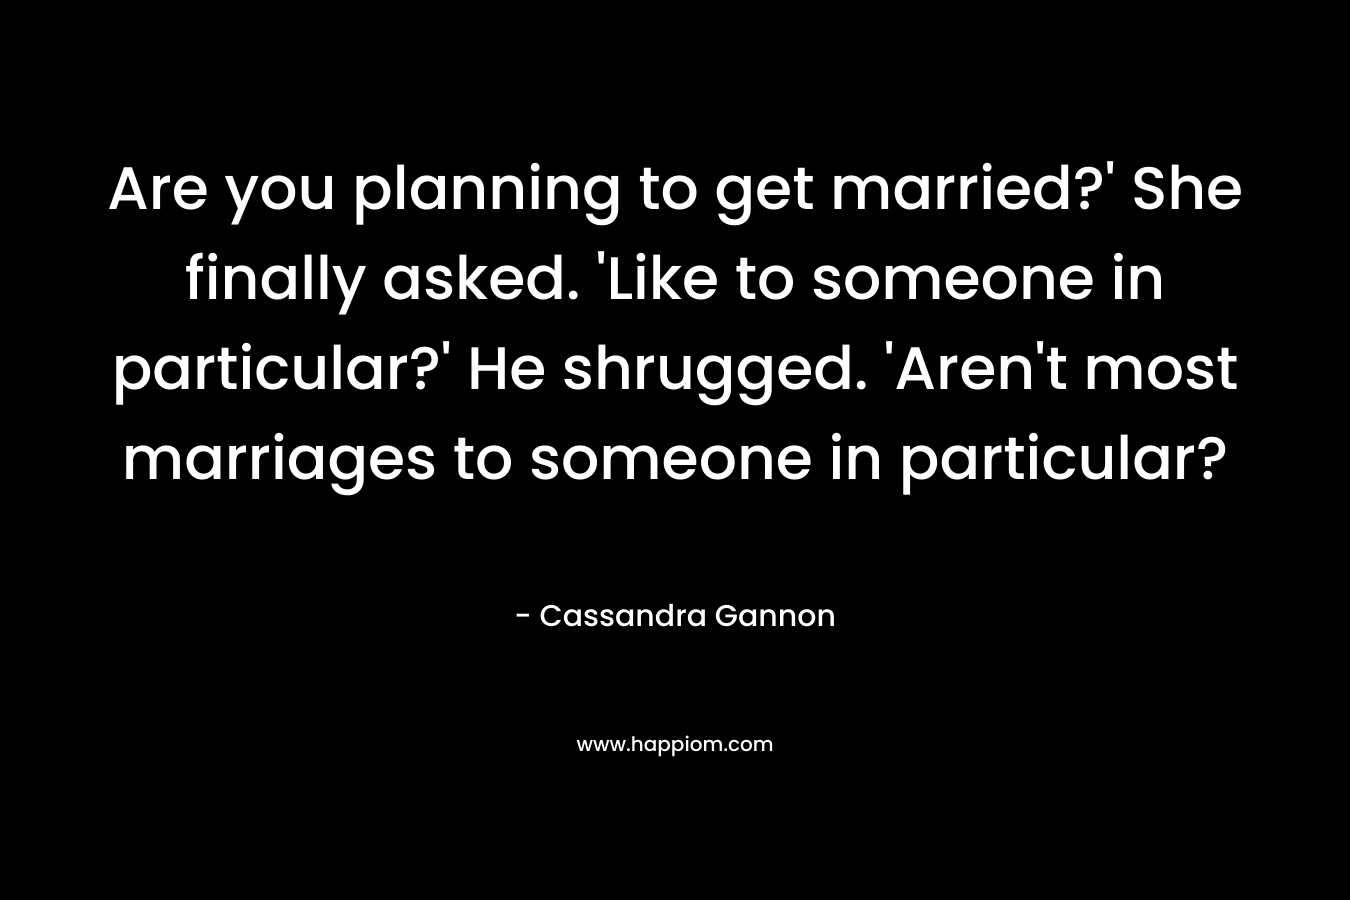 Are you planning to get married?’ She finally asked. ‘Like to someone in particular?’ He shrugged. ‘Aren’t most marriages to someone in particular? – Cassandra Gannon